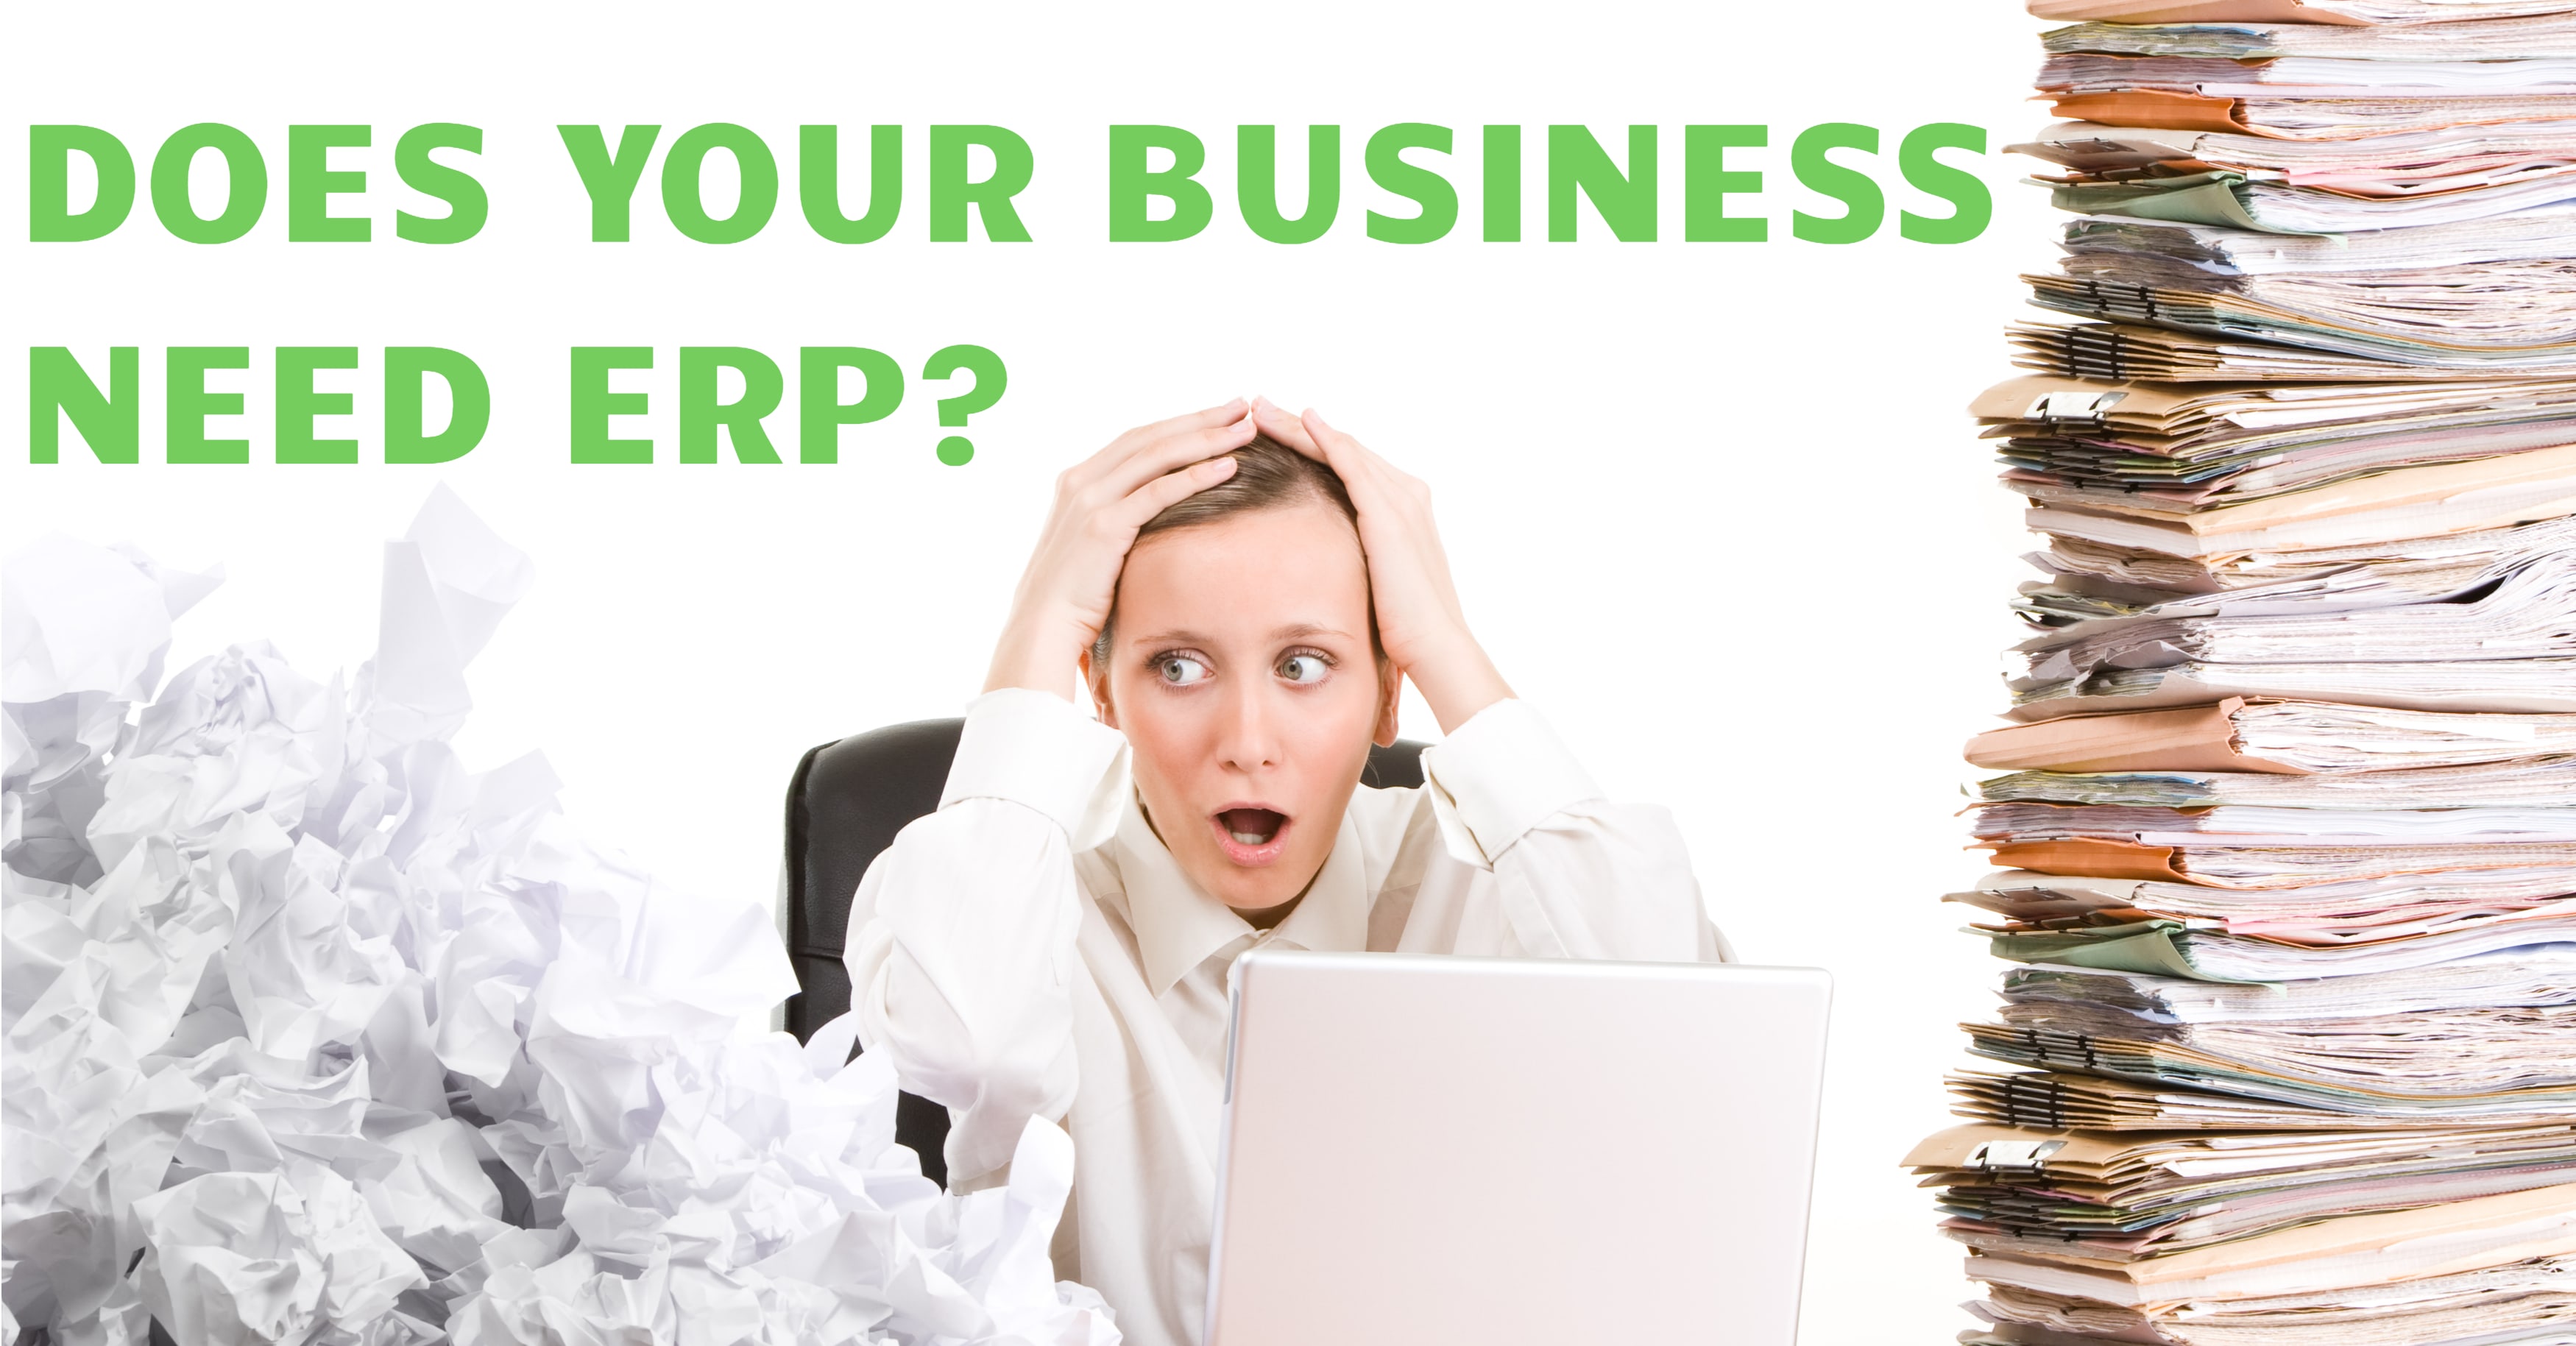 Does Your Business Need ERP?